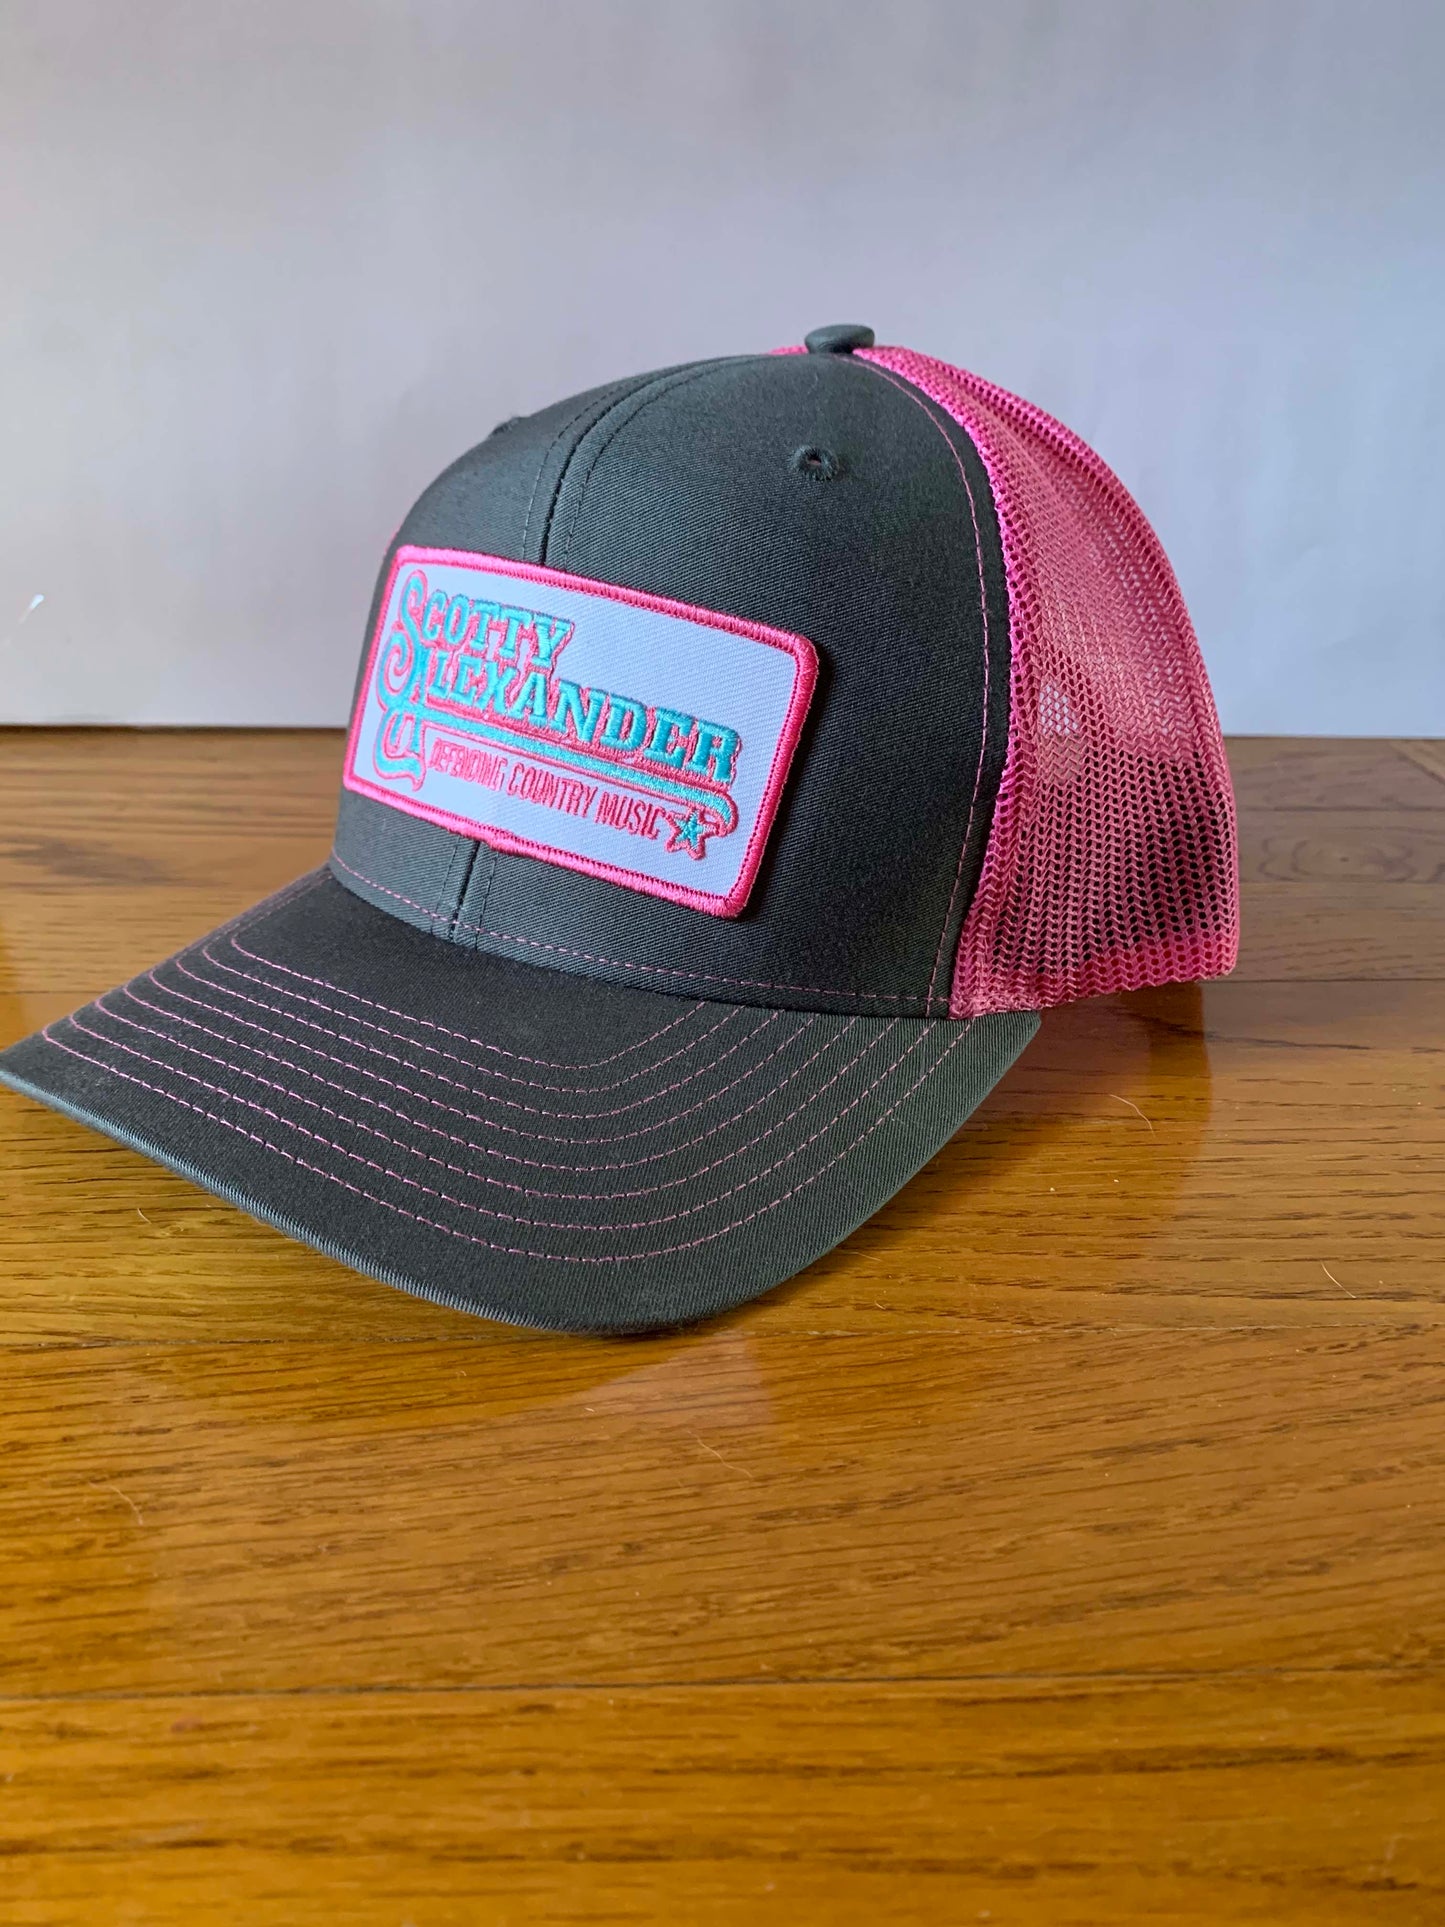 Grey & Pink Scotty Alexander "Defending Country Music" Hat